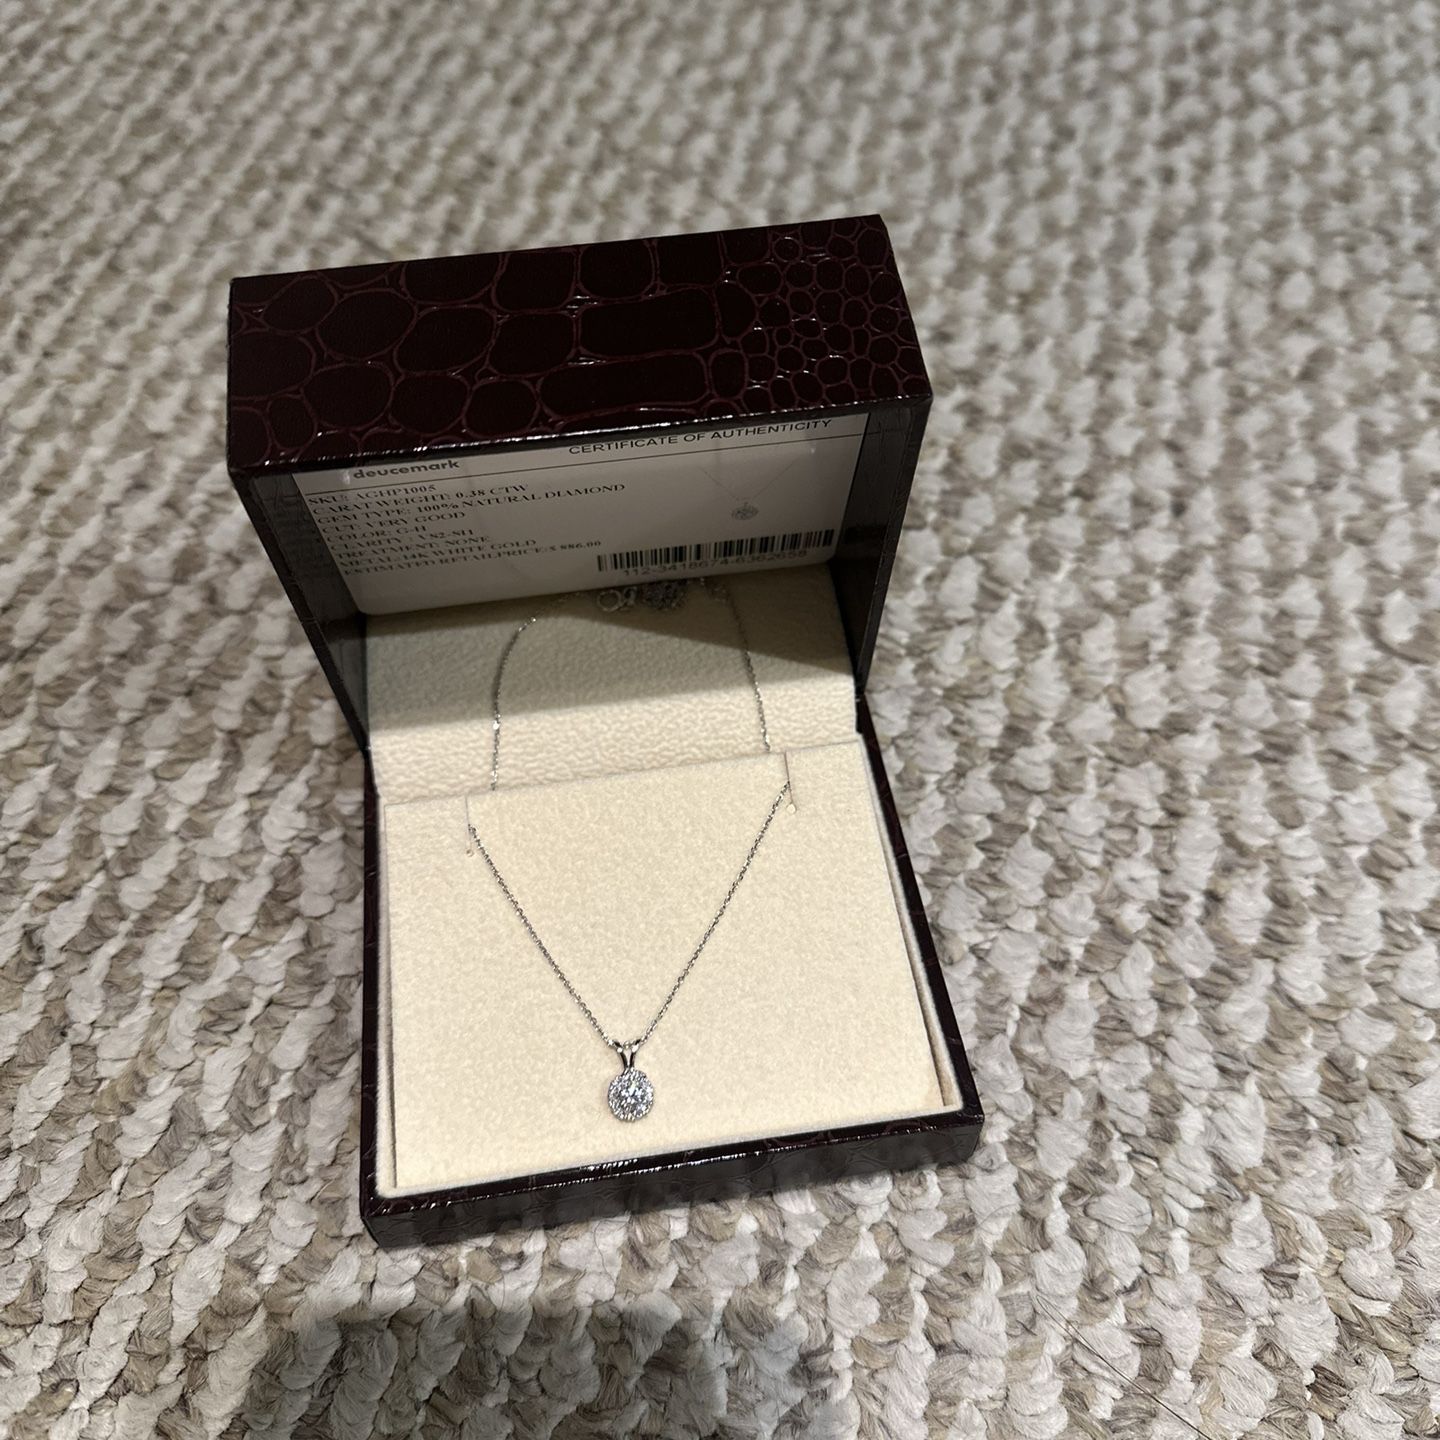 Beautiful Diamond Necklace for Sale in Laud By Sea, FL - OfferUp